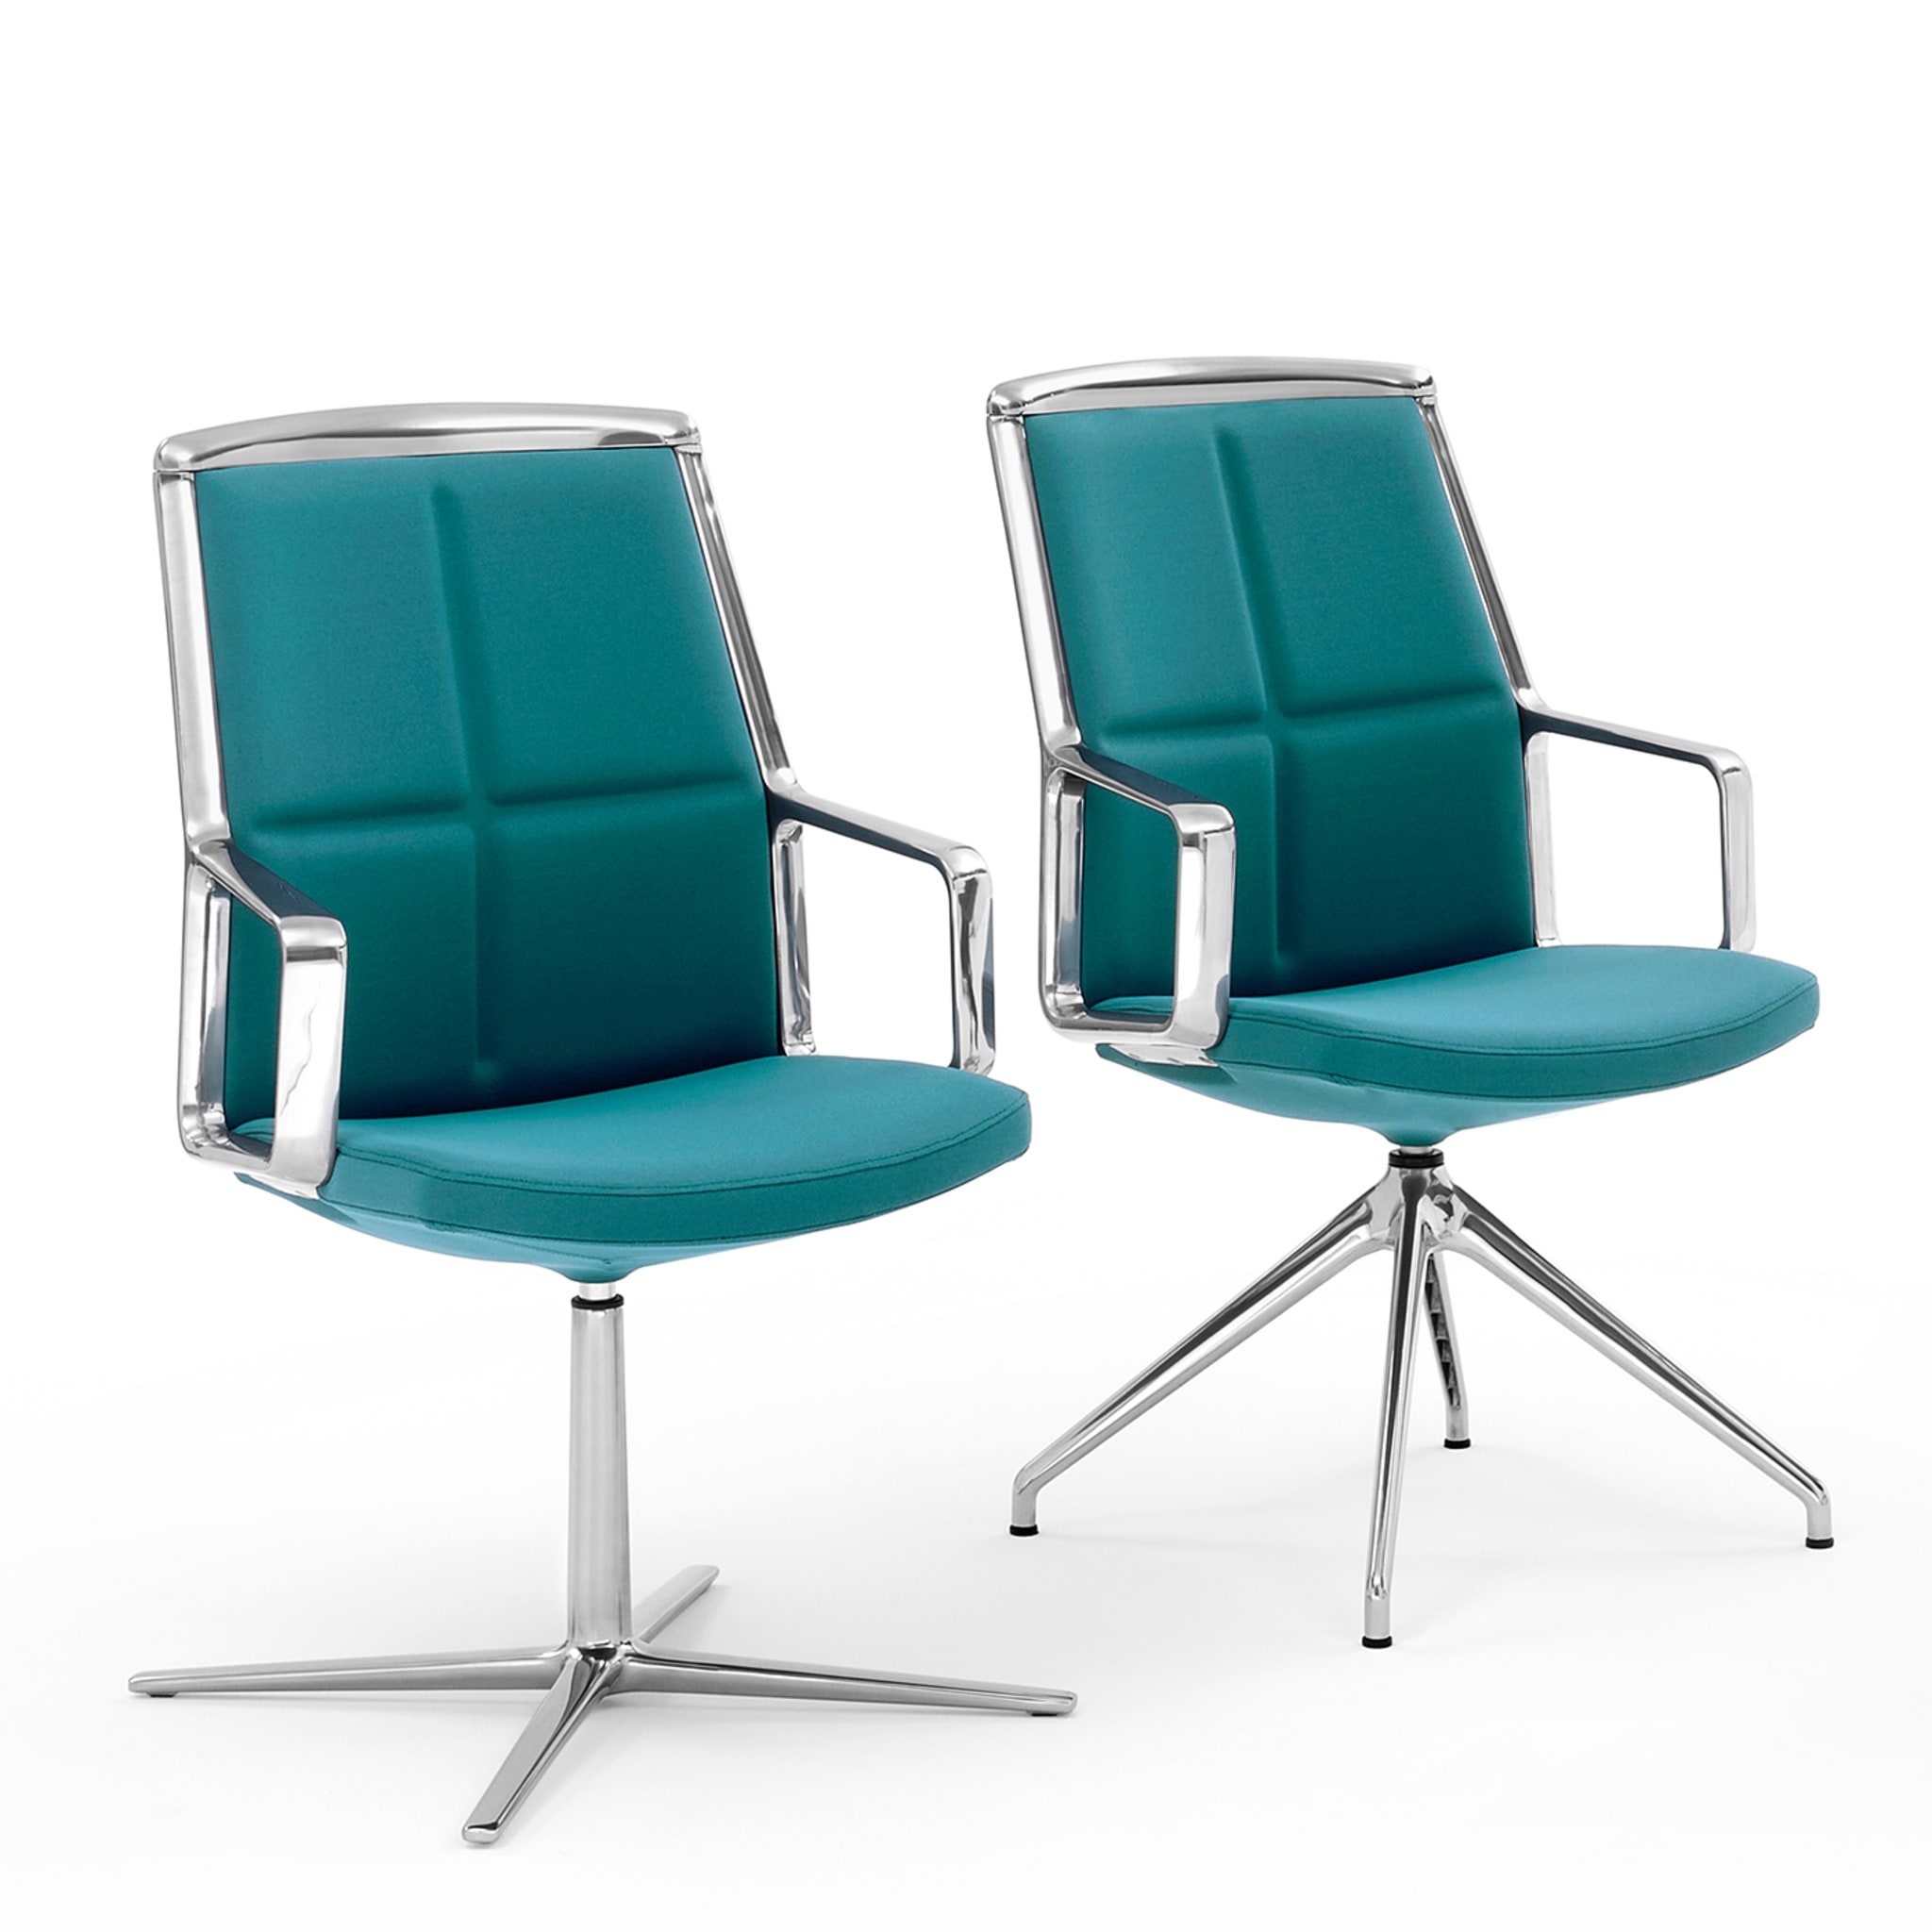 ADELE BLUE-GREEN MEETING CHAIR #1 by ORLANDINIDESIGN - Alternative view 1